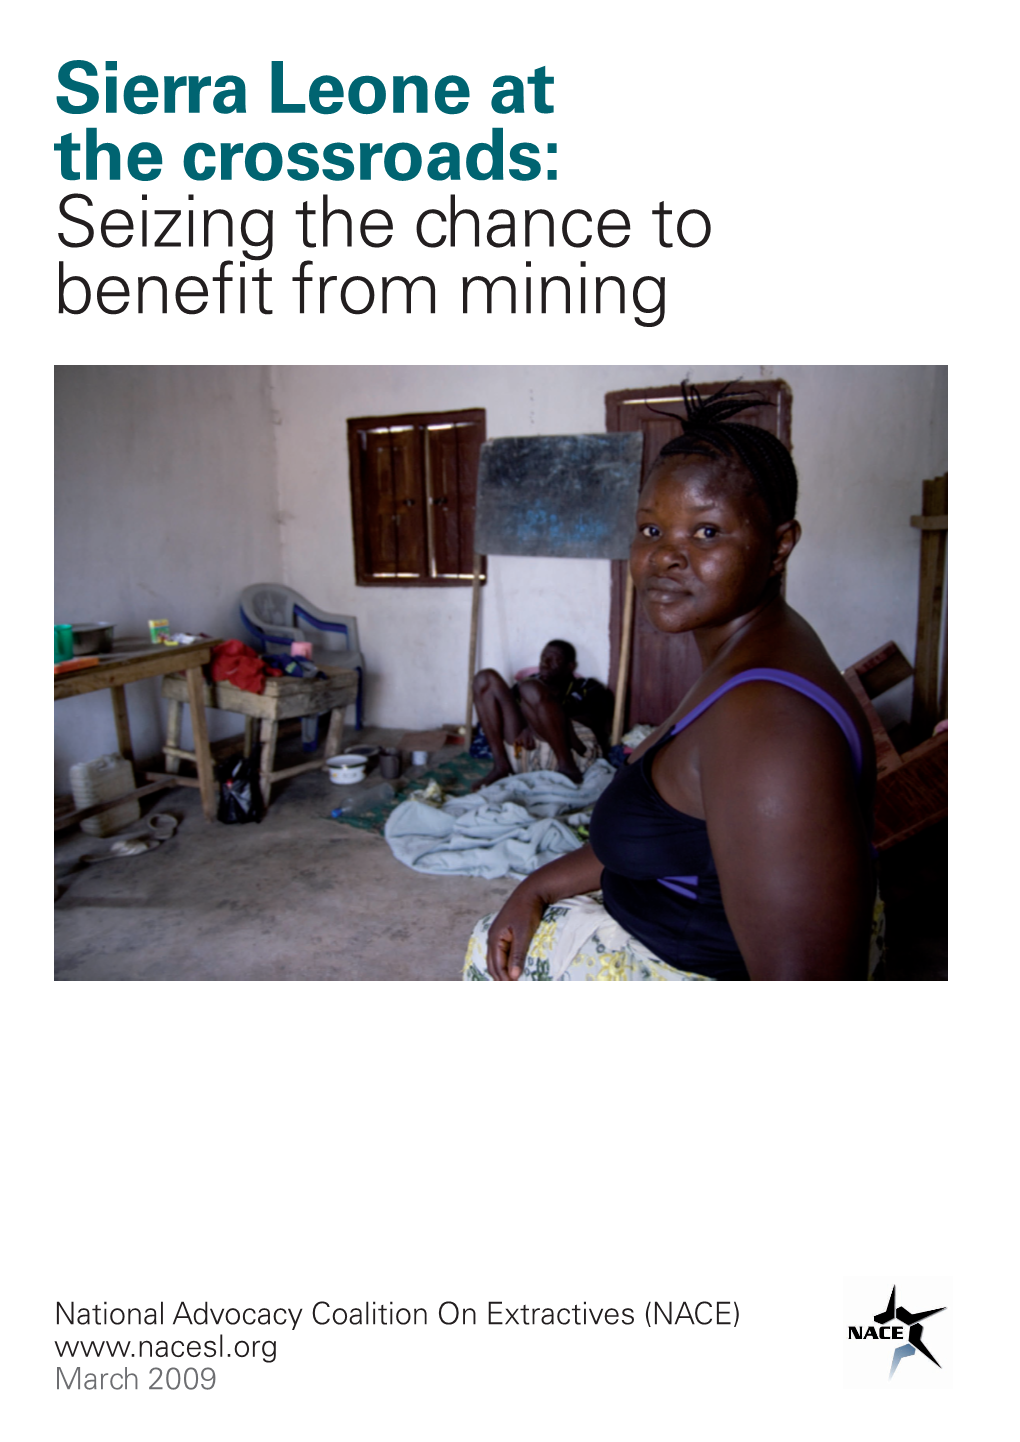 Sierra Leone at the Crossroads: Seizing the Chance to Benefit from Mining